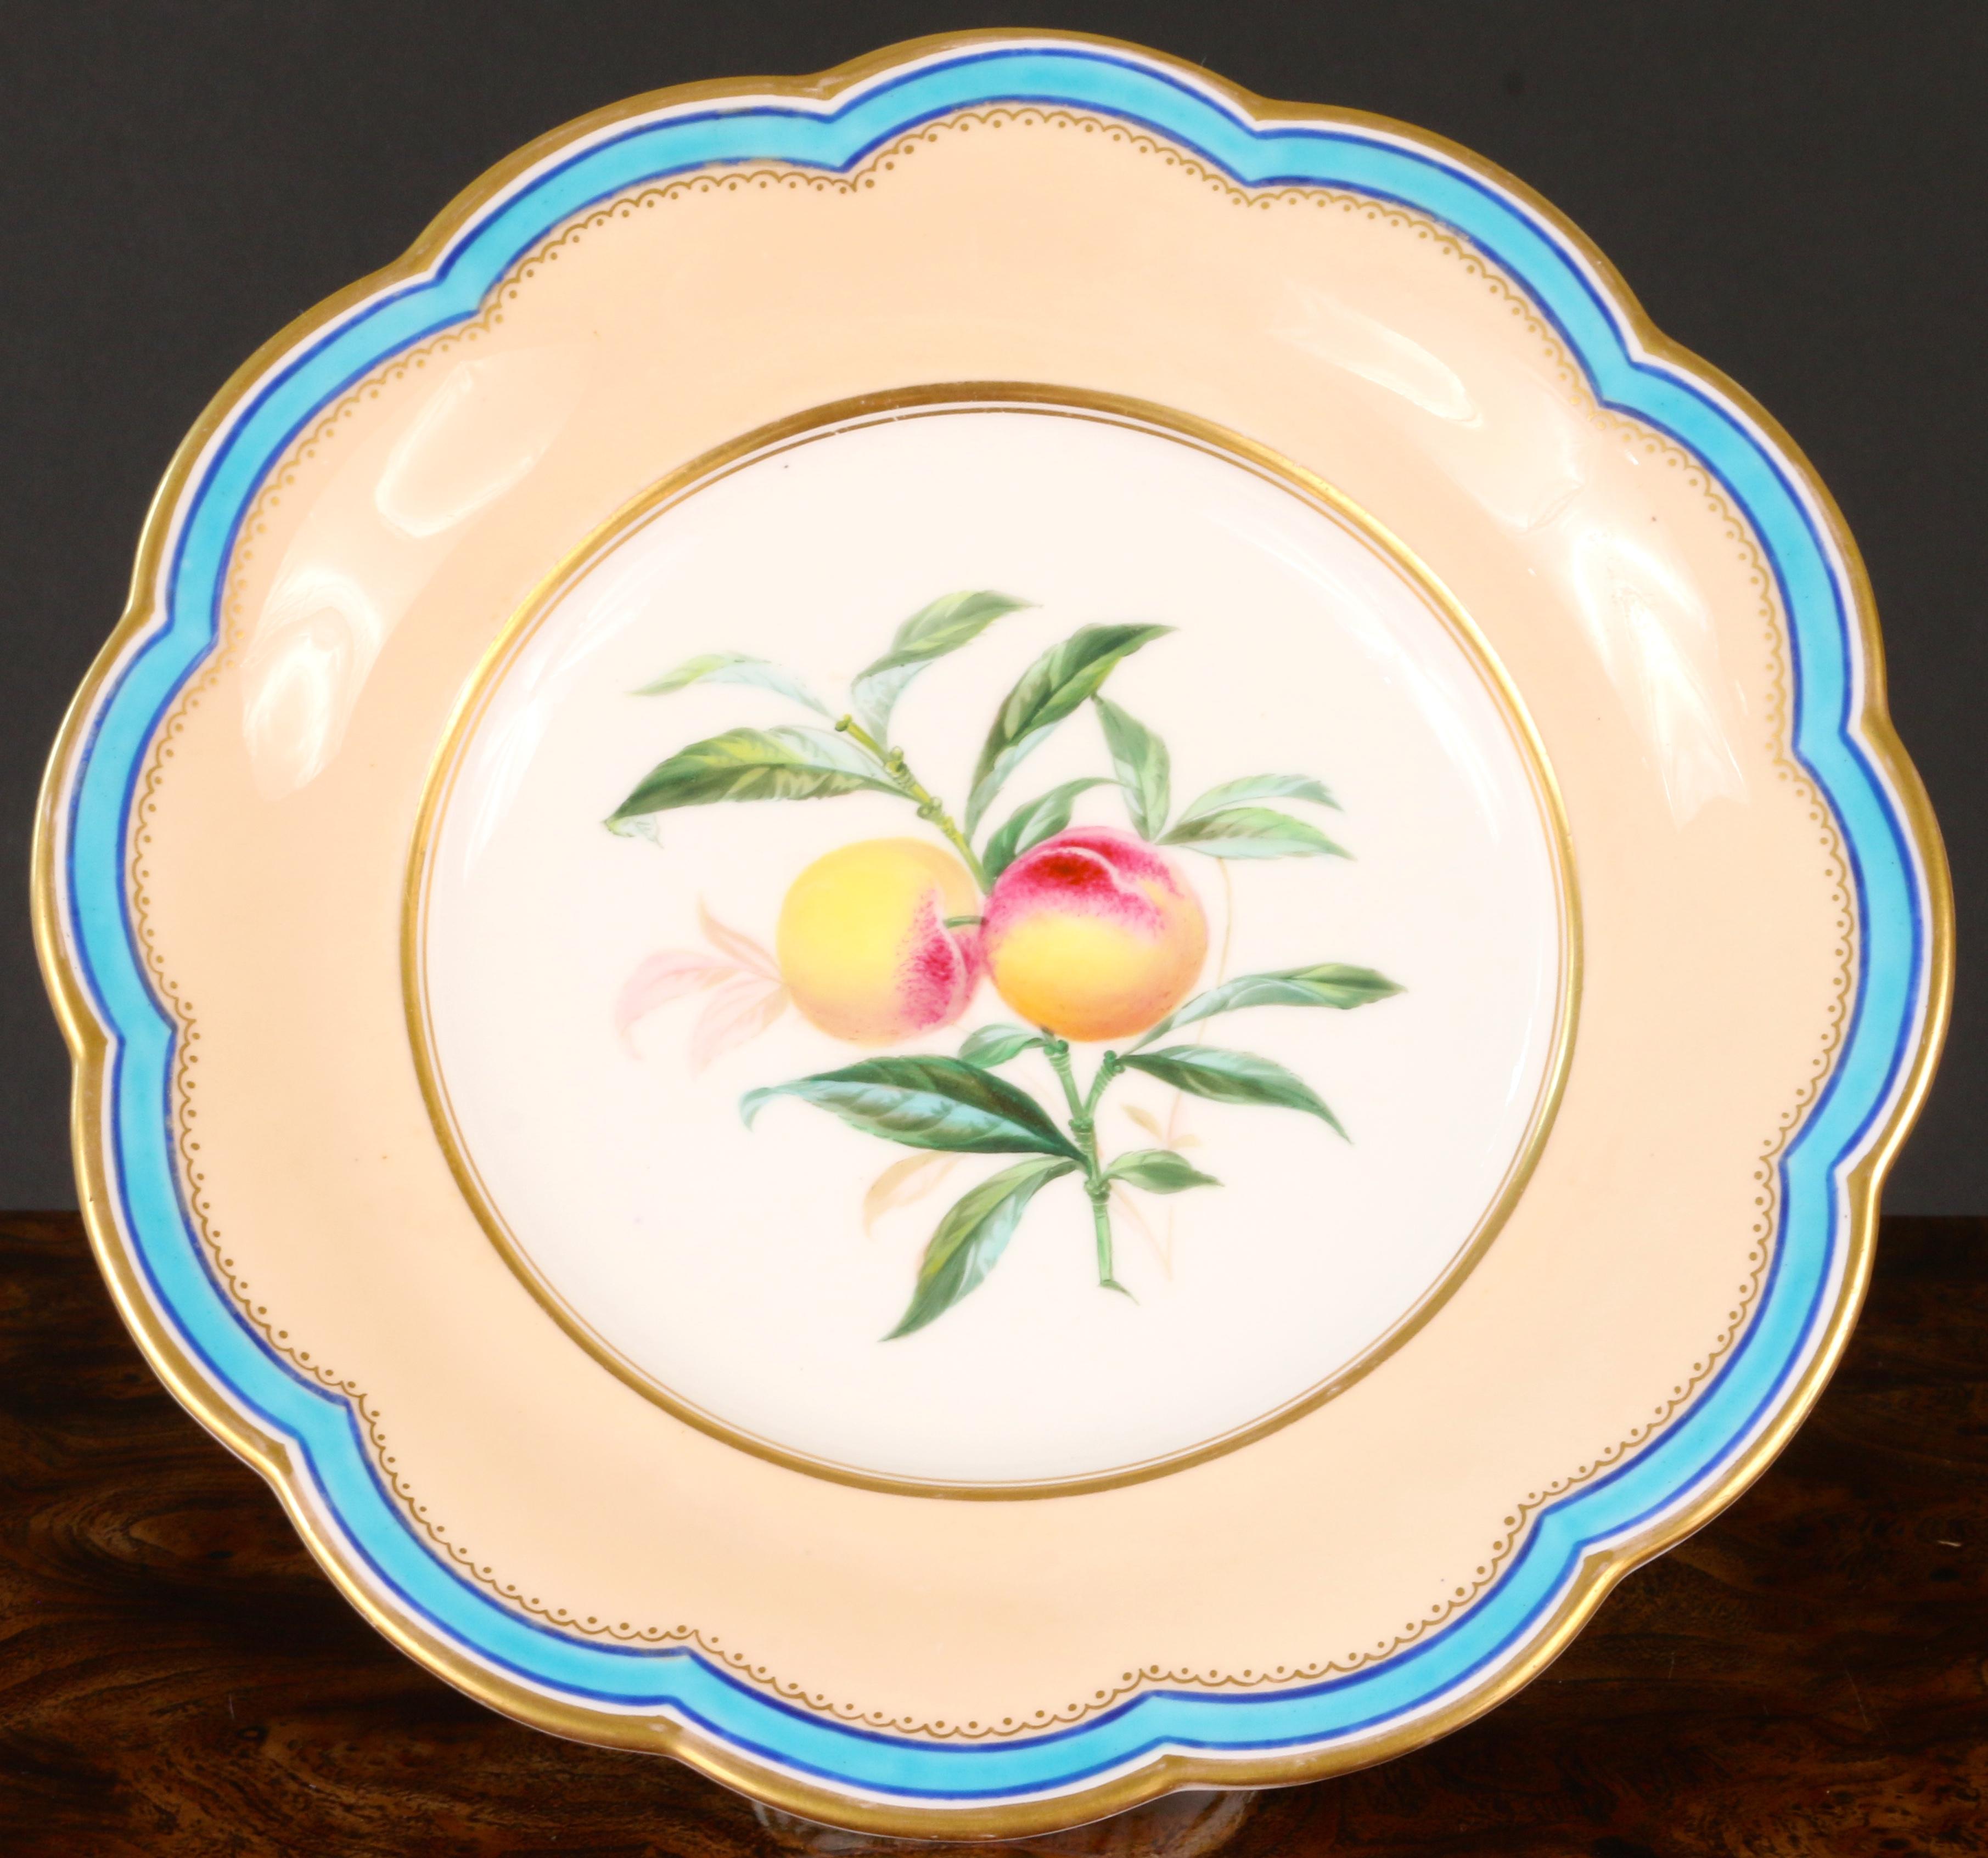 Beautiful hand-painted dessert service from the prestigious Davenport firm of Longport, Staffaordshire, England. The set consists of 5 compotes and 12 plates and features buff and turquoise color ground with lovely hand-painted fruit. Each plate or